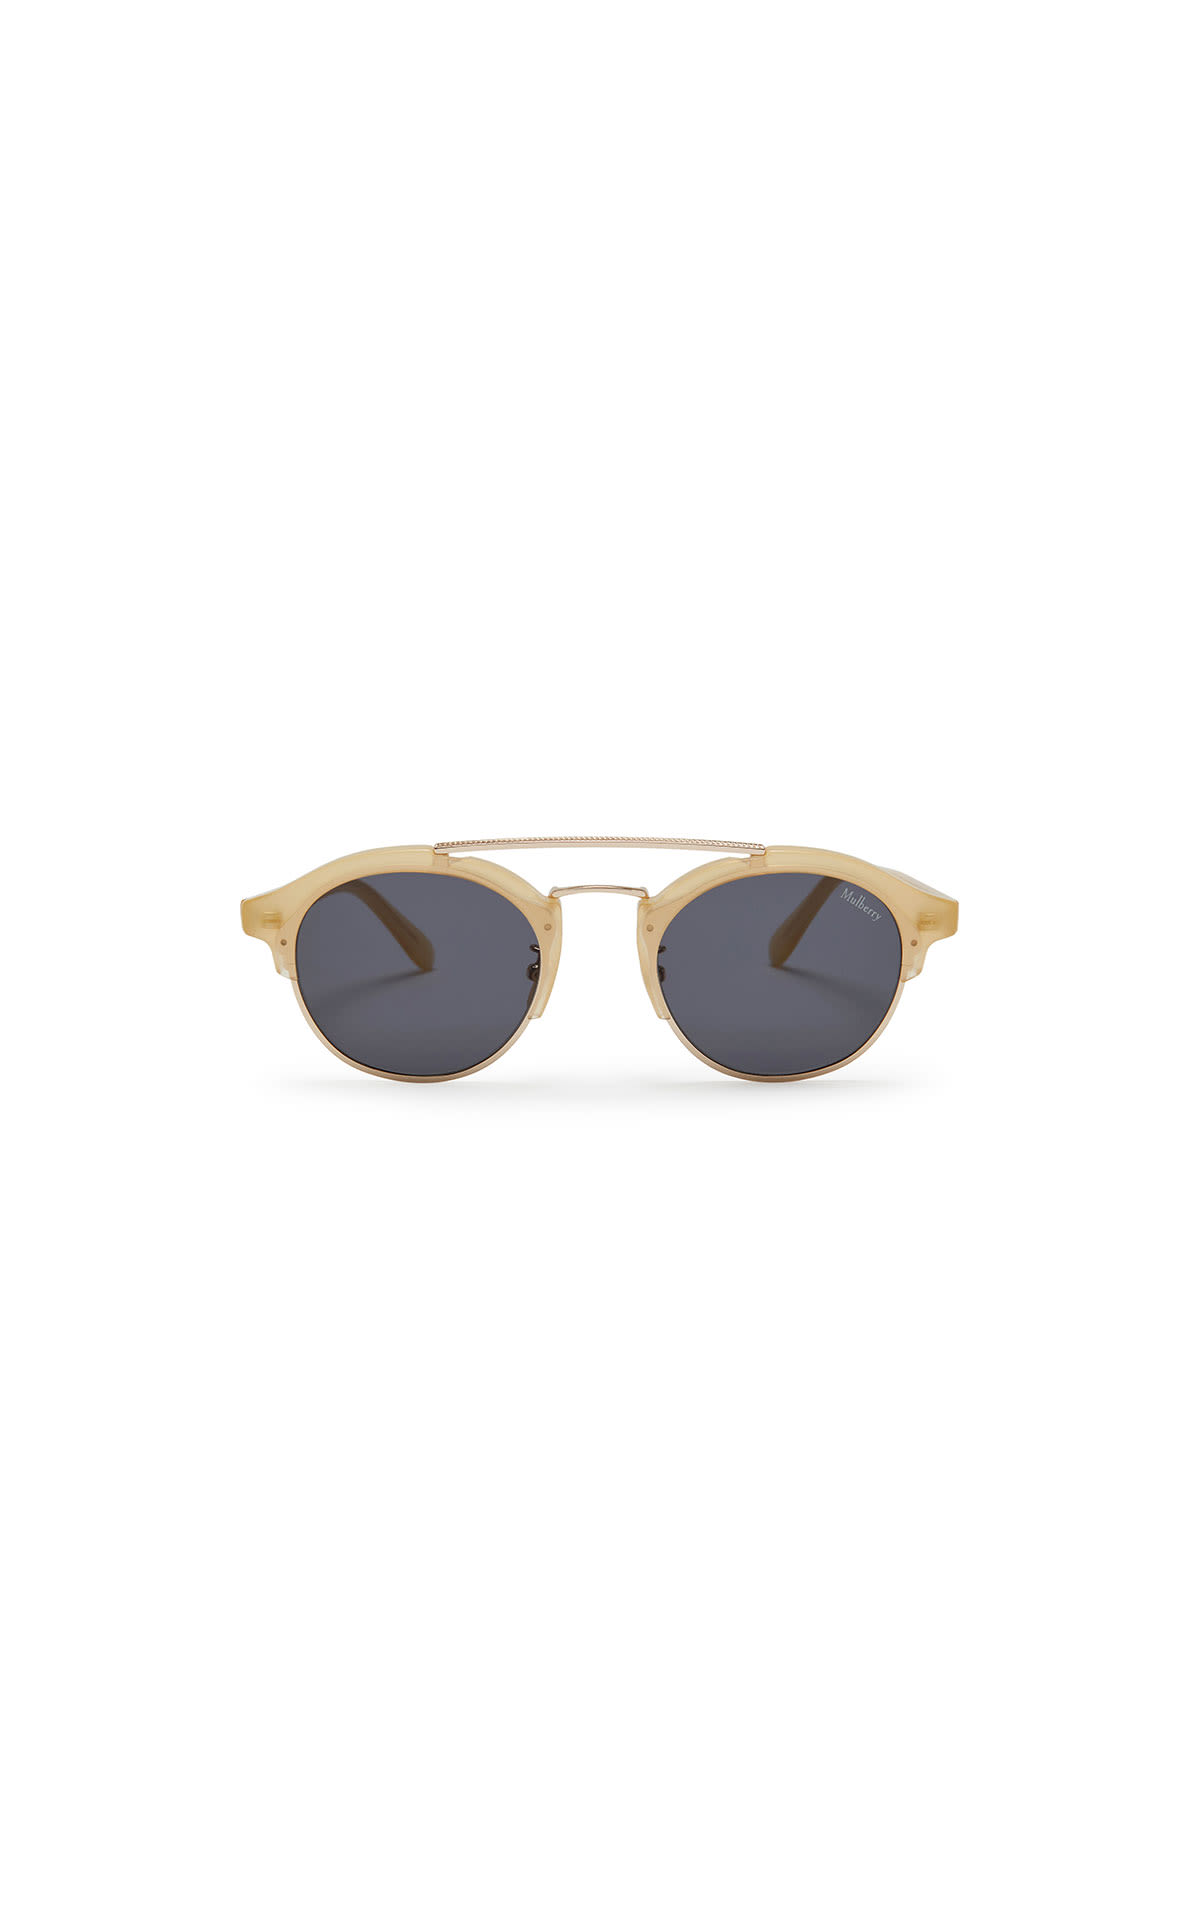 Mulberry Enyd acetate/metal sunglasses from Bicester Village